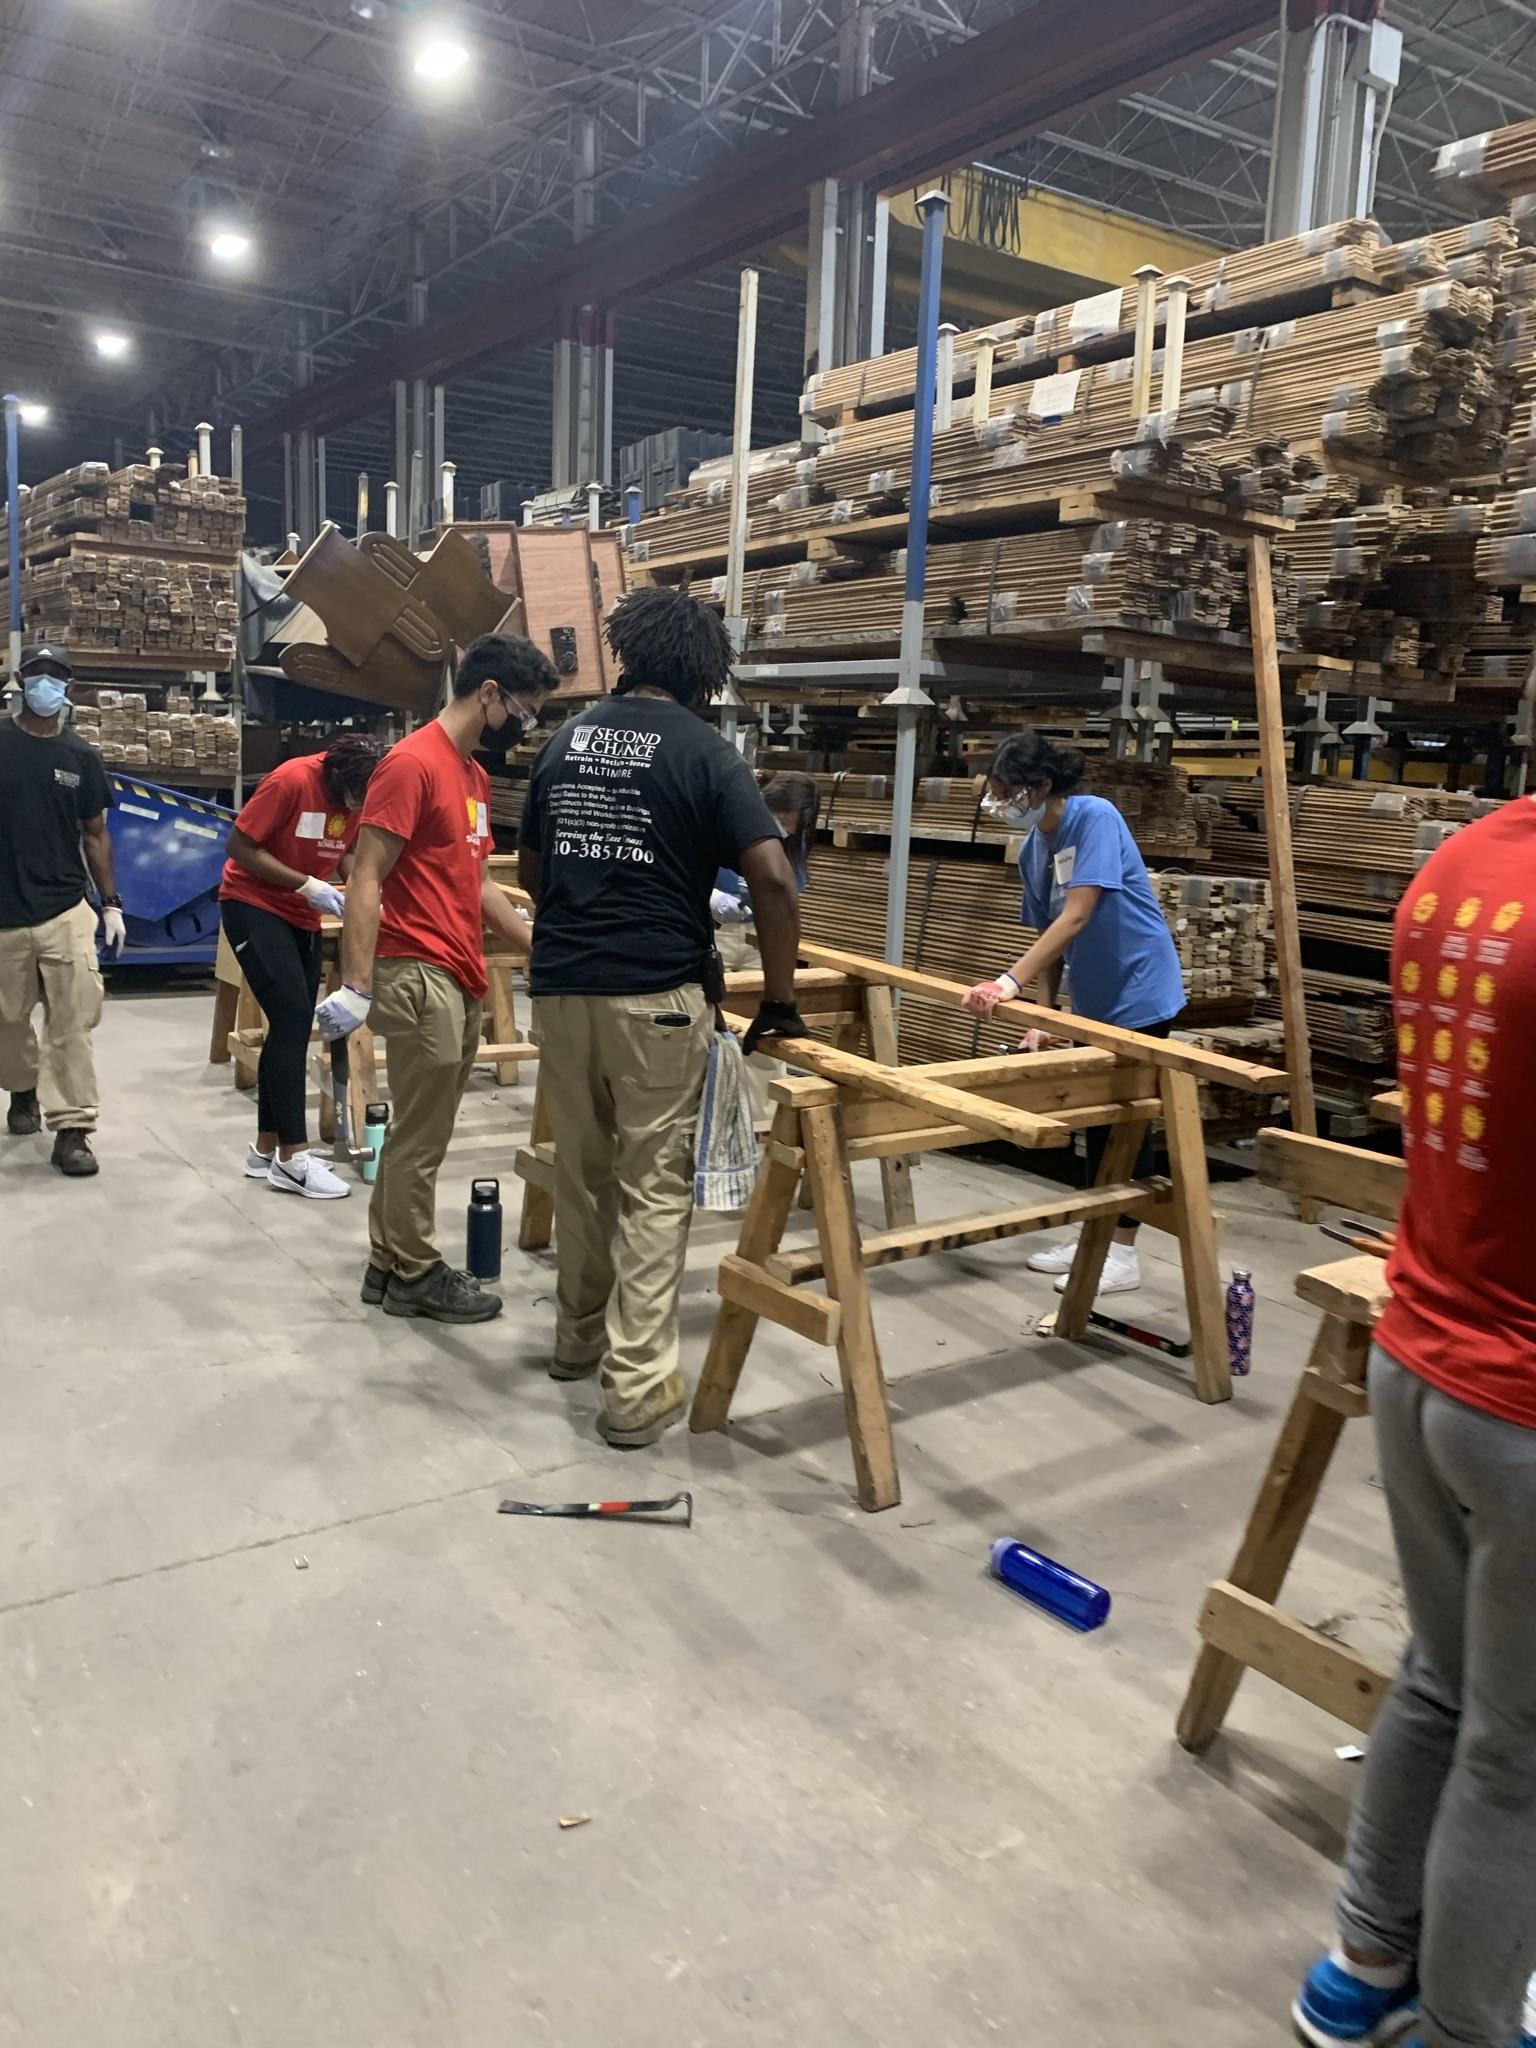 Students work in the Second Chance warehouse with wooden planks. Someone wearing a black Second Chance shirt is guiding them.